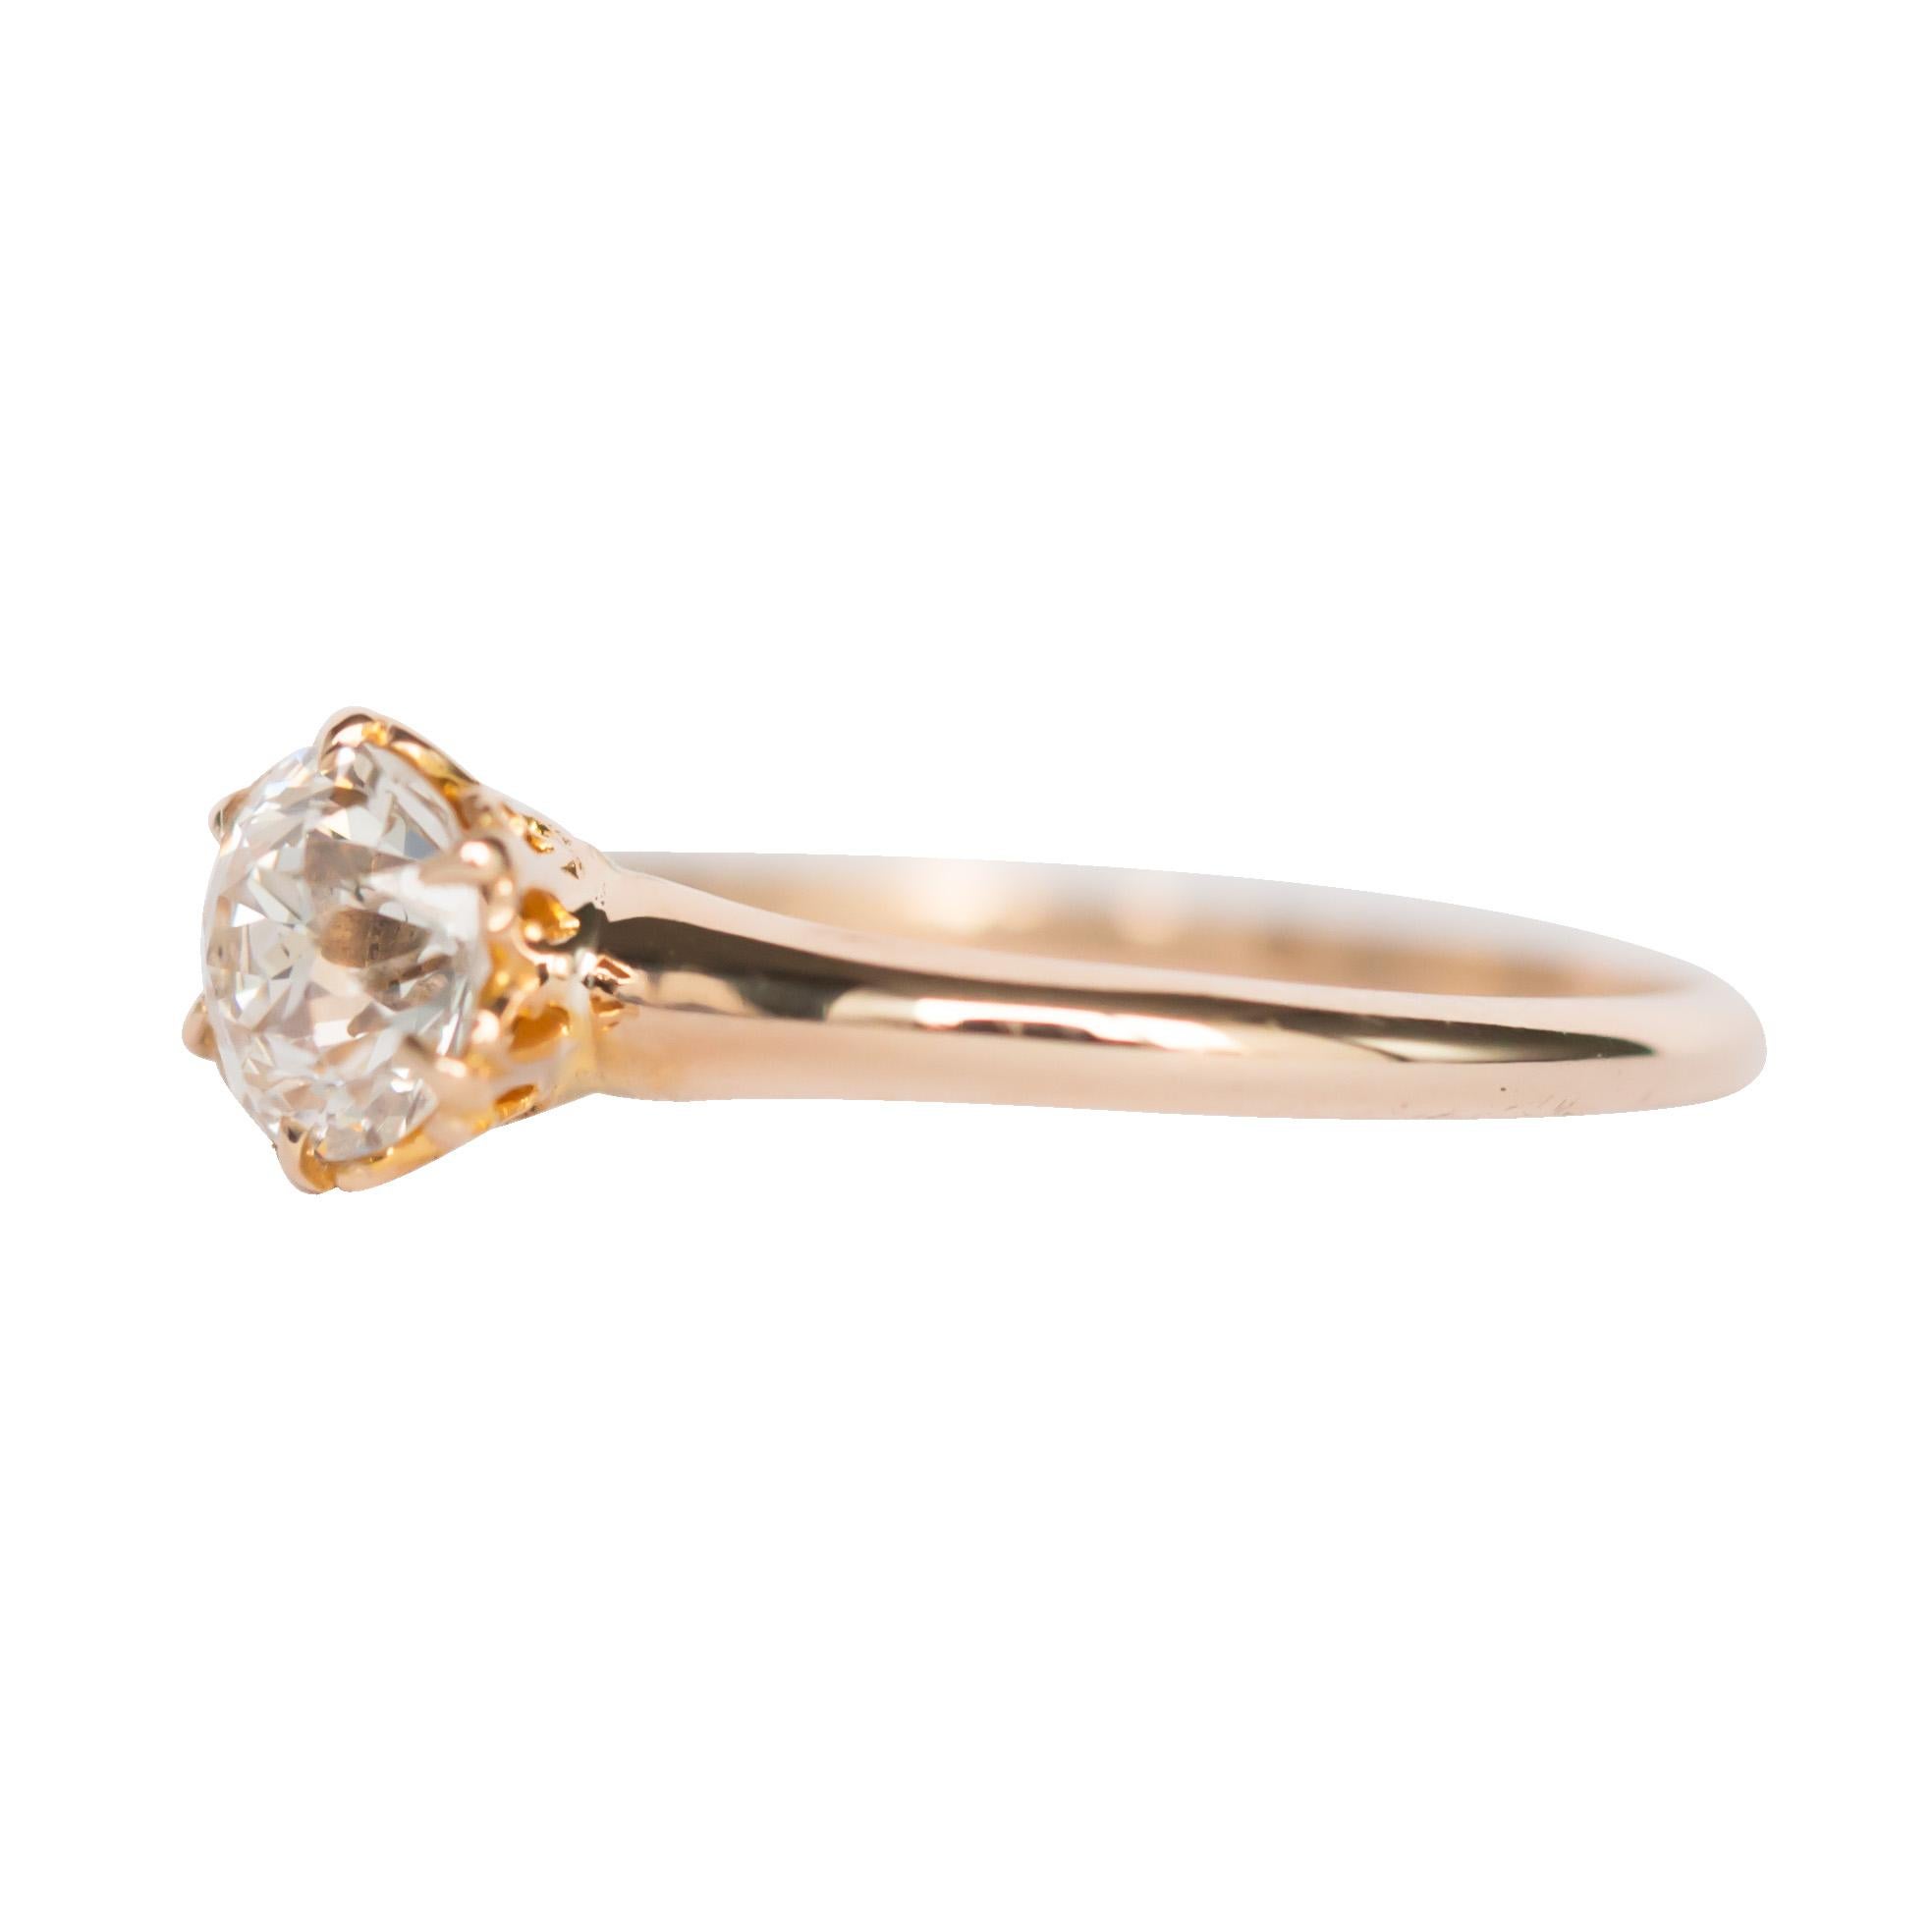 Ring Size: 6
Metal Type: 14K Yellow Gold
Weight: 1.4 grams

Center Diamond Details
GIA CERTIFIED Center Diamond - Certificate # 6193757432
Shape: Circular Brilliant 
Carat Weight: .62 carat
Color: G
Clarity: SI1

Finger to Top of Stone Measurement: